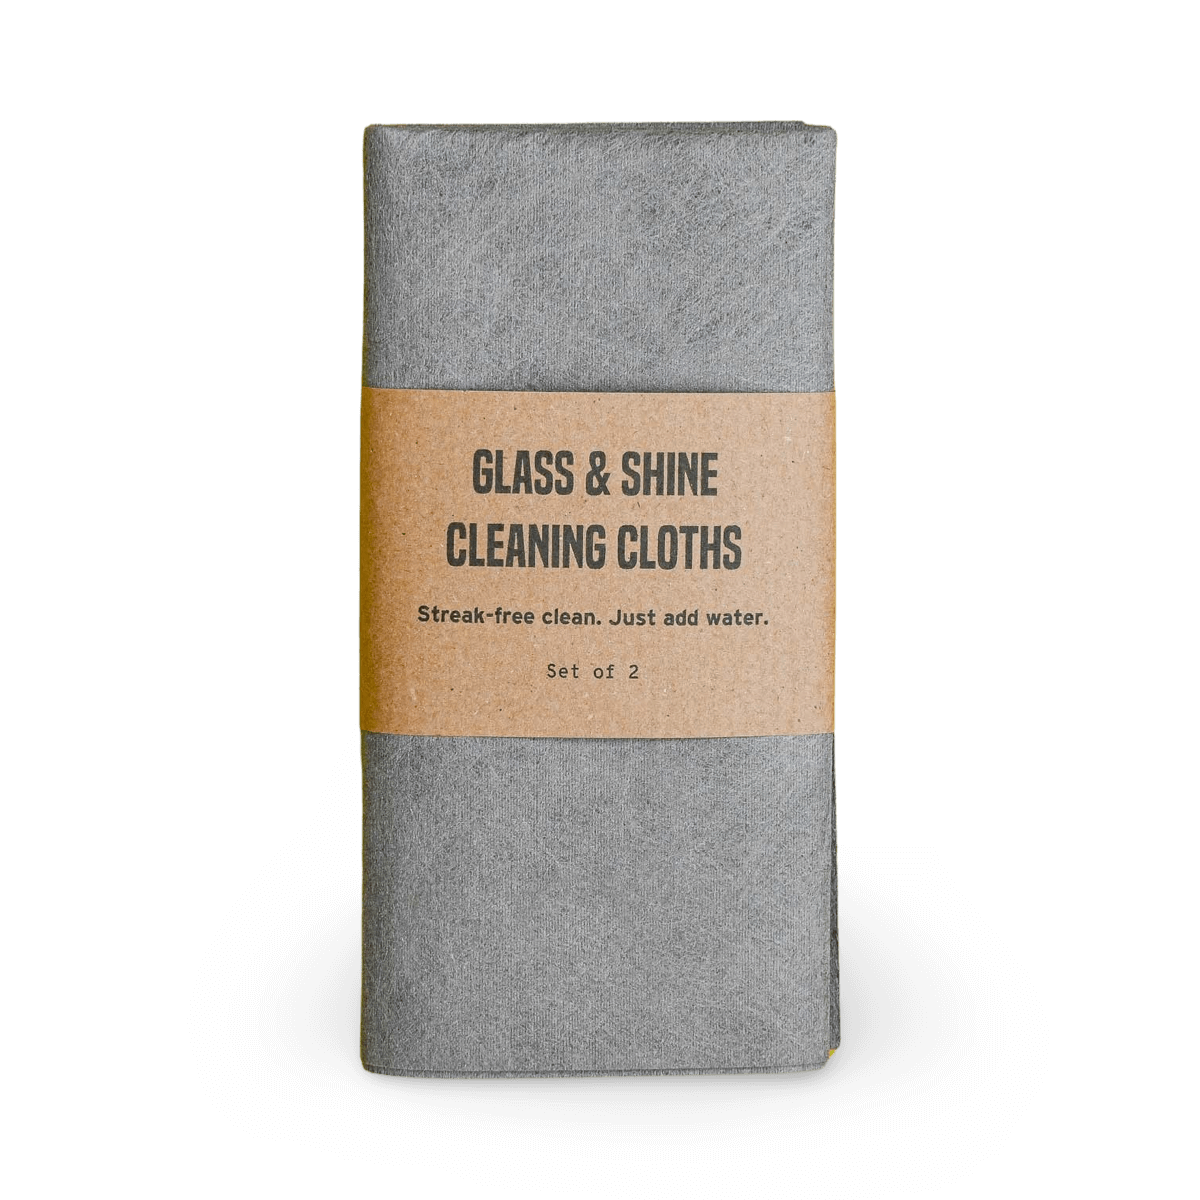 Glass & Shine Cleaning Cloths